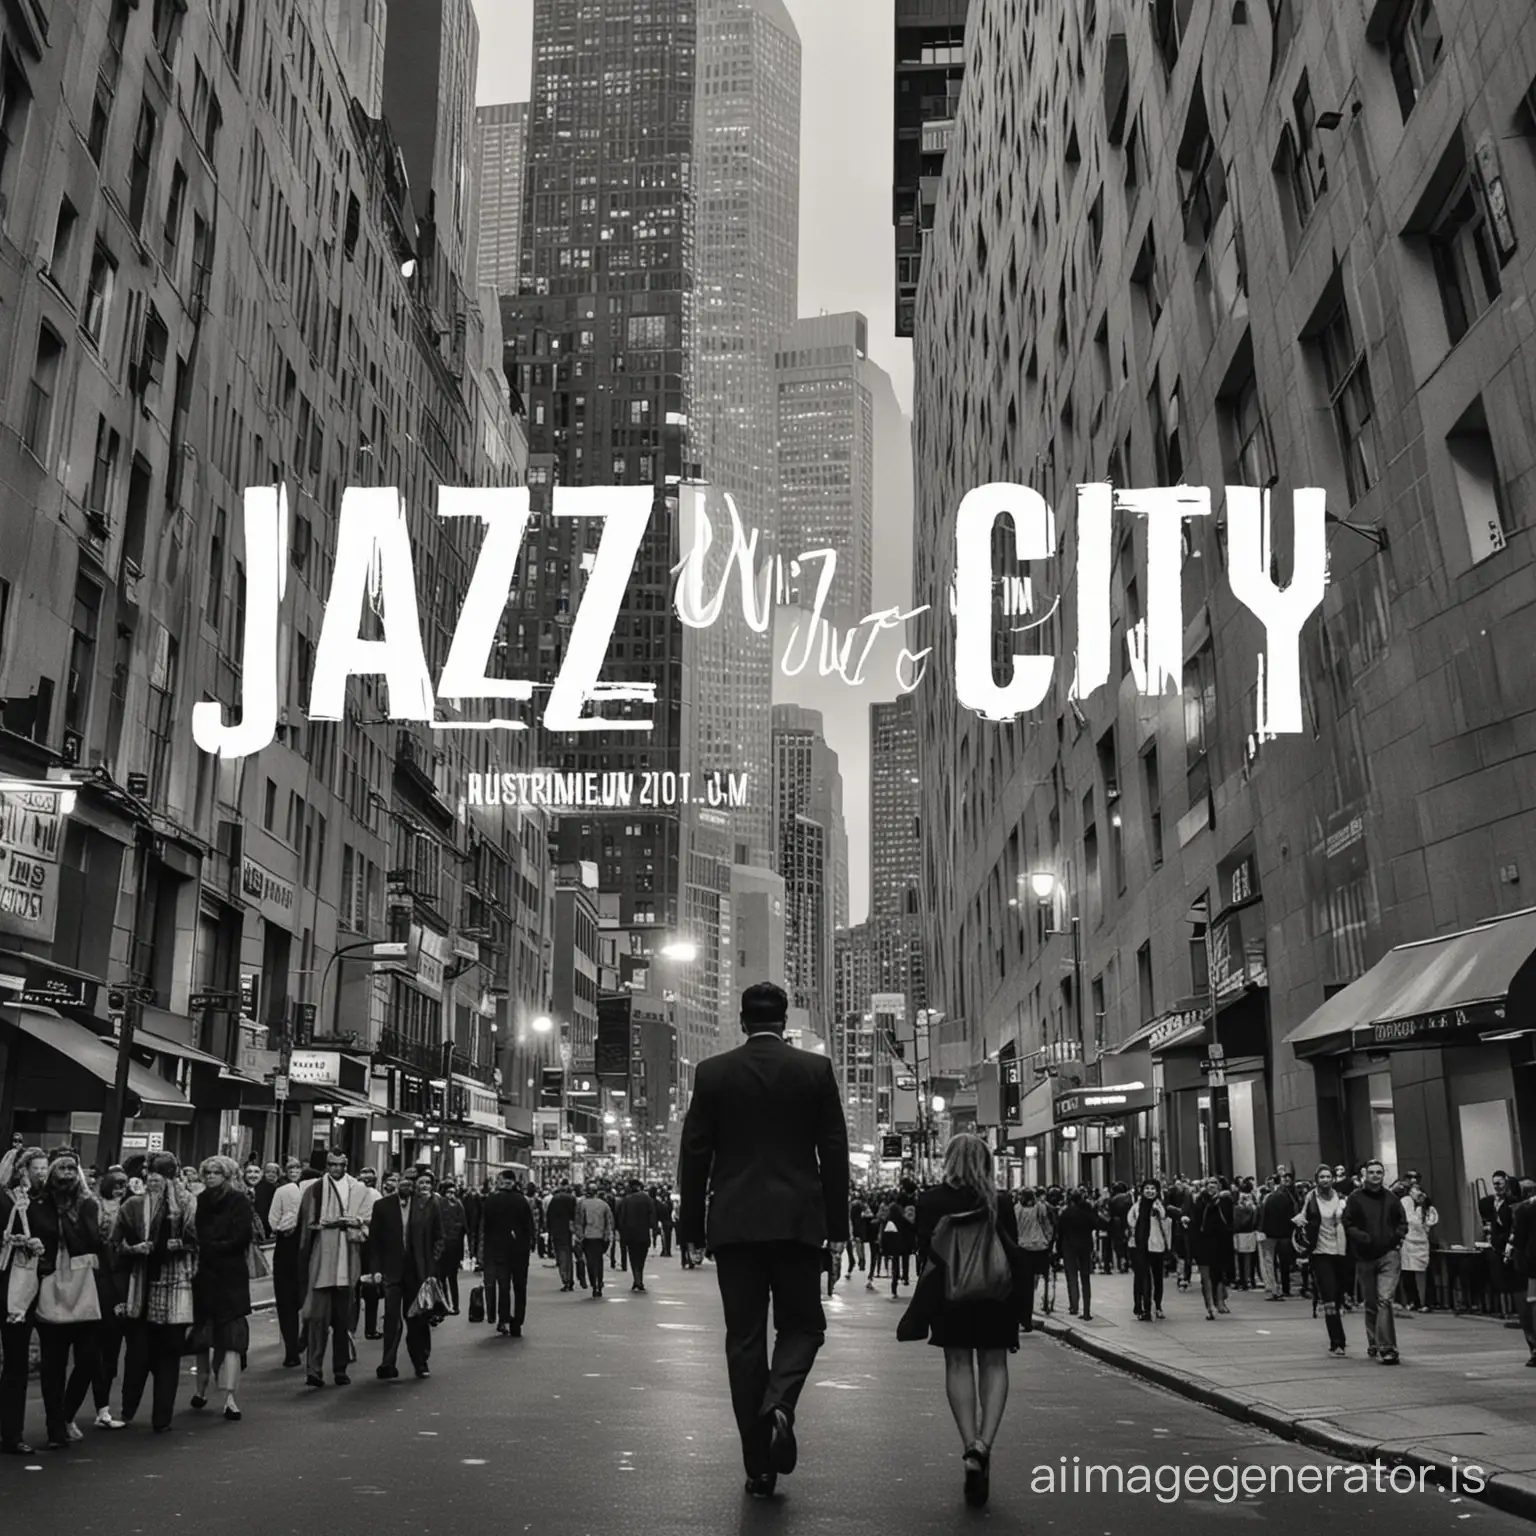 Vibrant-Jazz-Performance-in-the-Urban-Cityscape